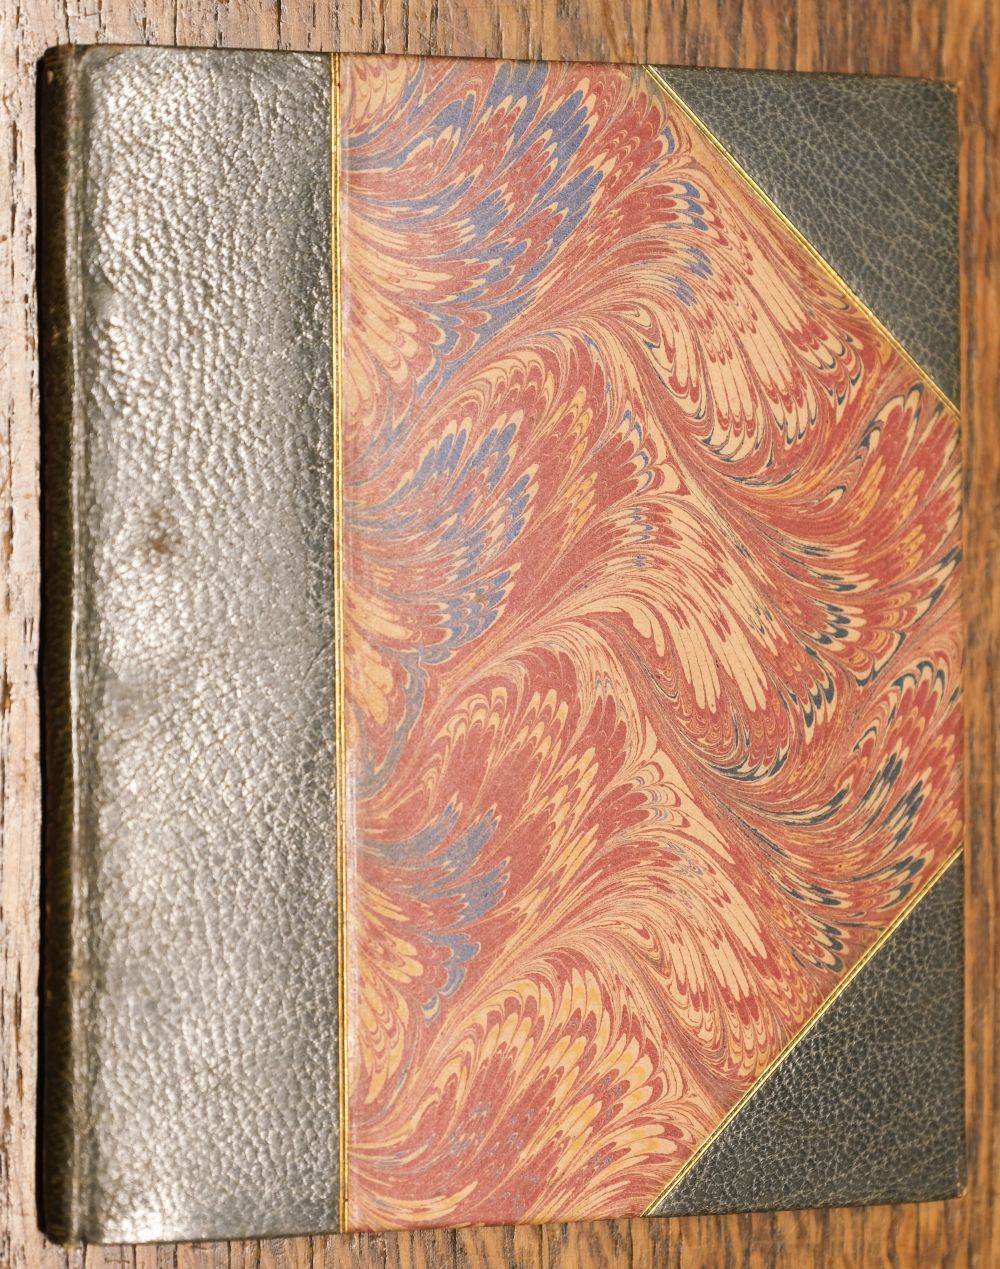 Bindings. The Legend of Jubal and other Poems, by George Eliot, 1874 - Image 7 of 12